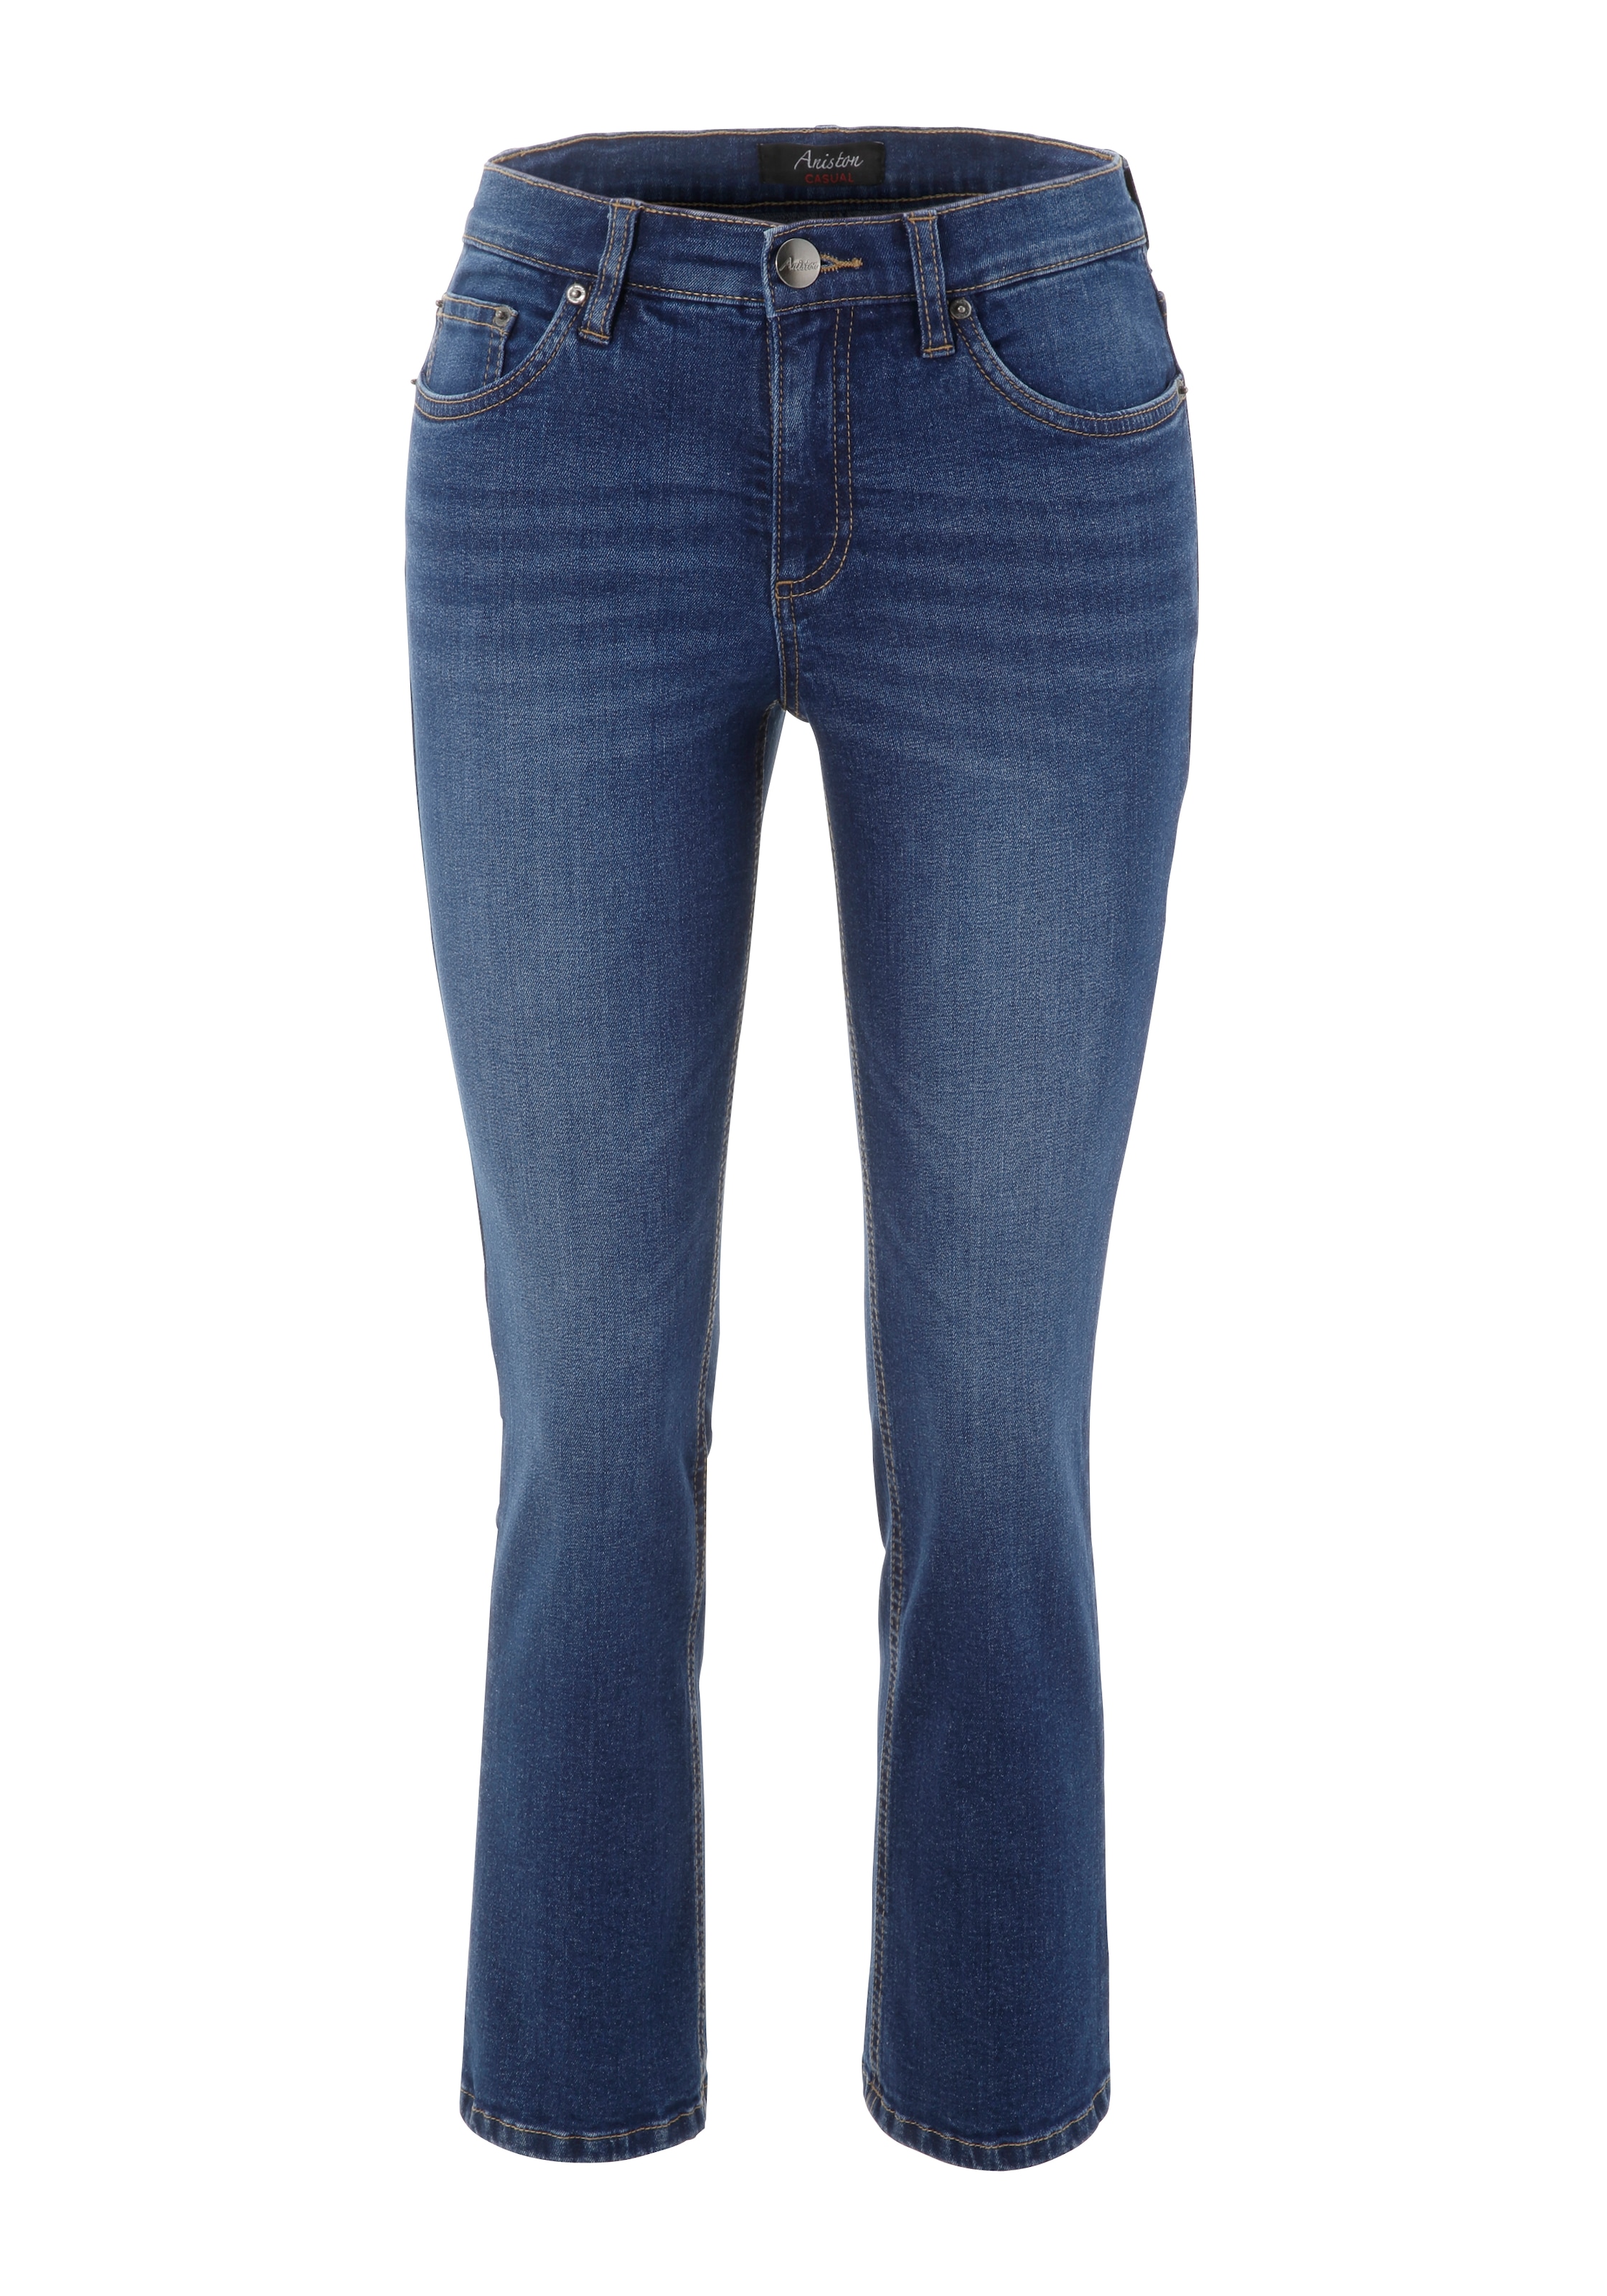 Aniston CASUAL Bootcut-Jeans, in trendiger 7/8-Länge online bei OTTO